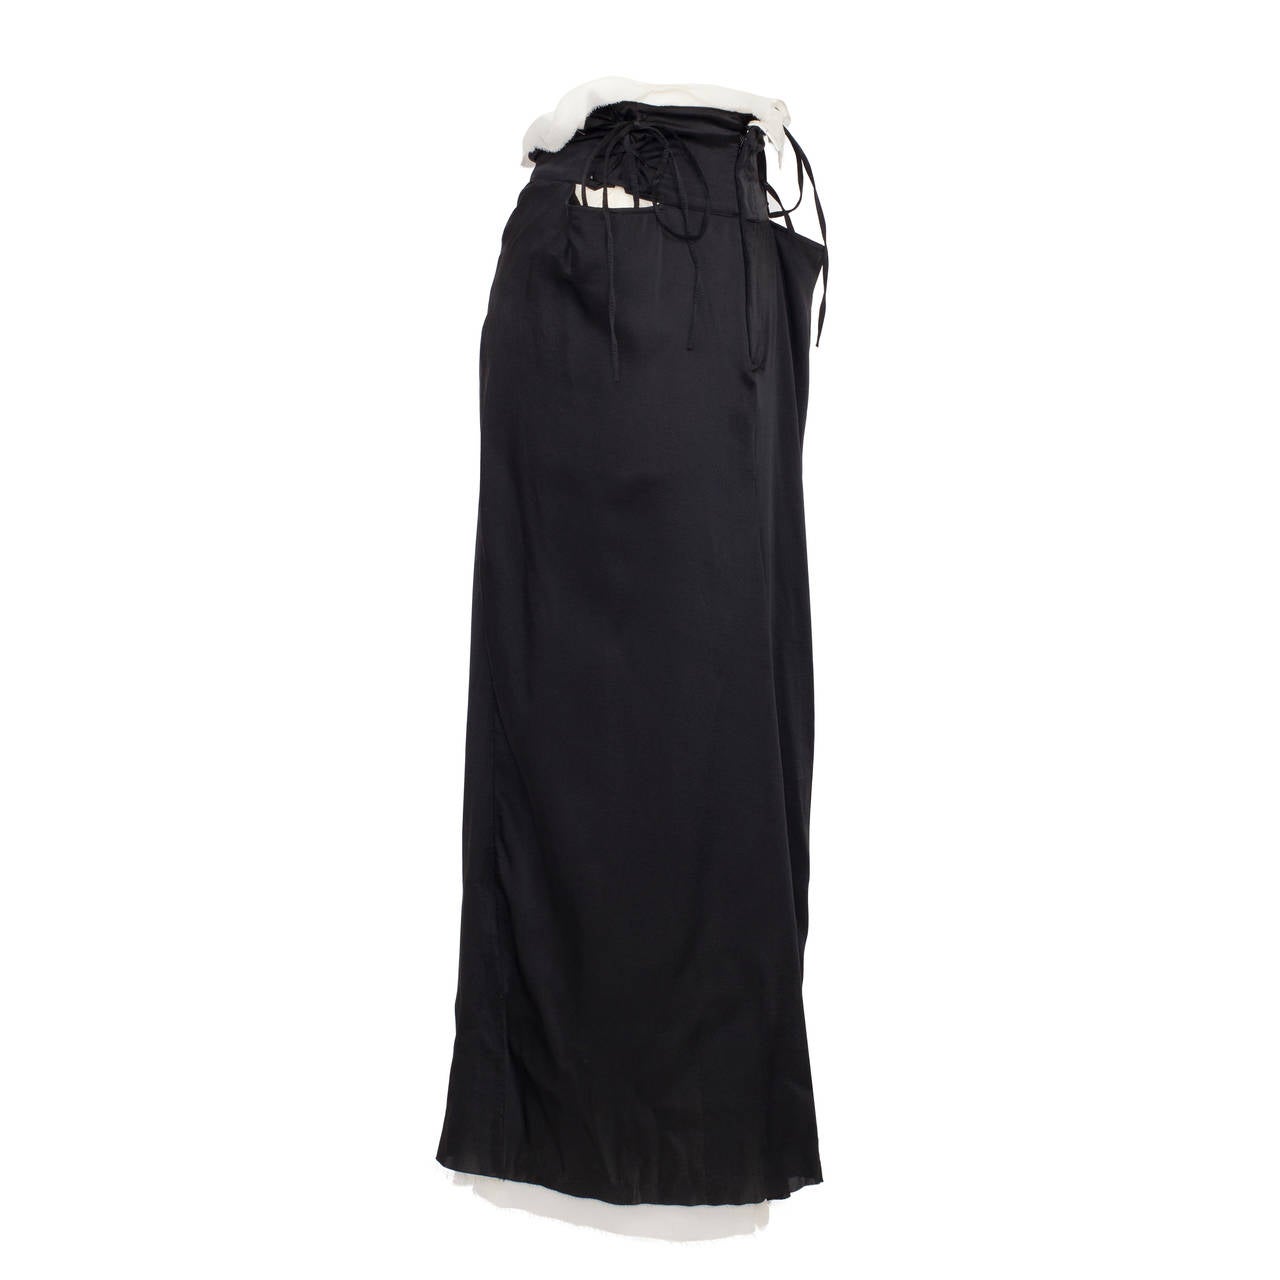 Yohji Yamamoto black / white silk skirt from 1990's with adjustable Lace up details. New with tag.
Original size - 2 ( Fits like M)
Measurements : 
Waist - About 64 cm (Adjustable with laces on sides)
Width - 65 cm
Length - 100 cm